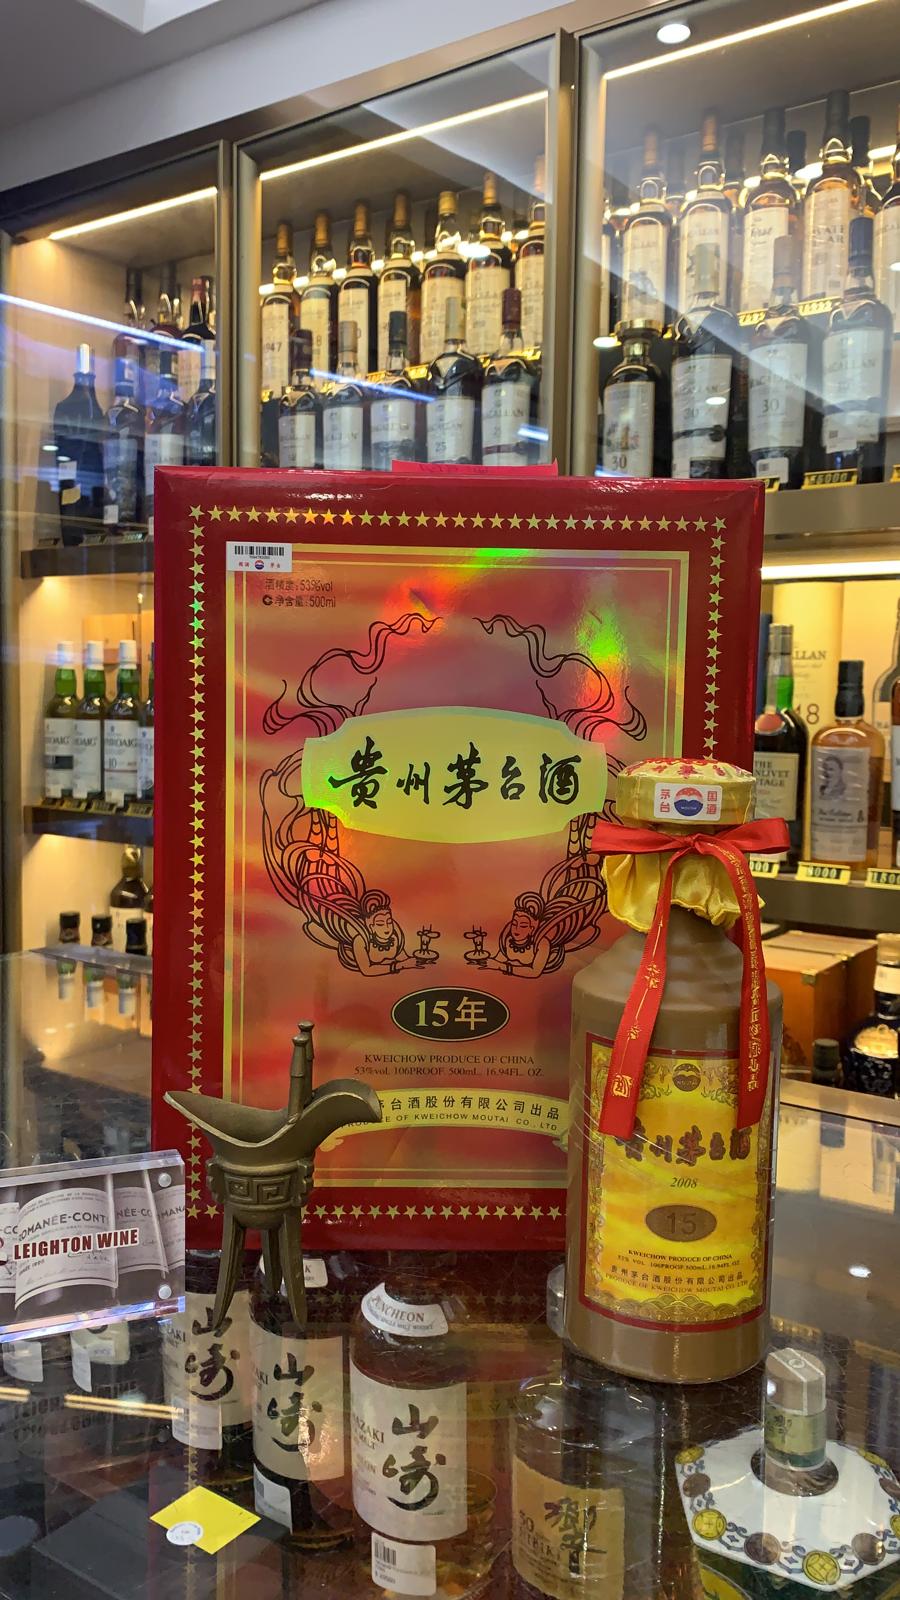 Kweichow Moutai 15 Year Old 500ml (2008）